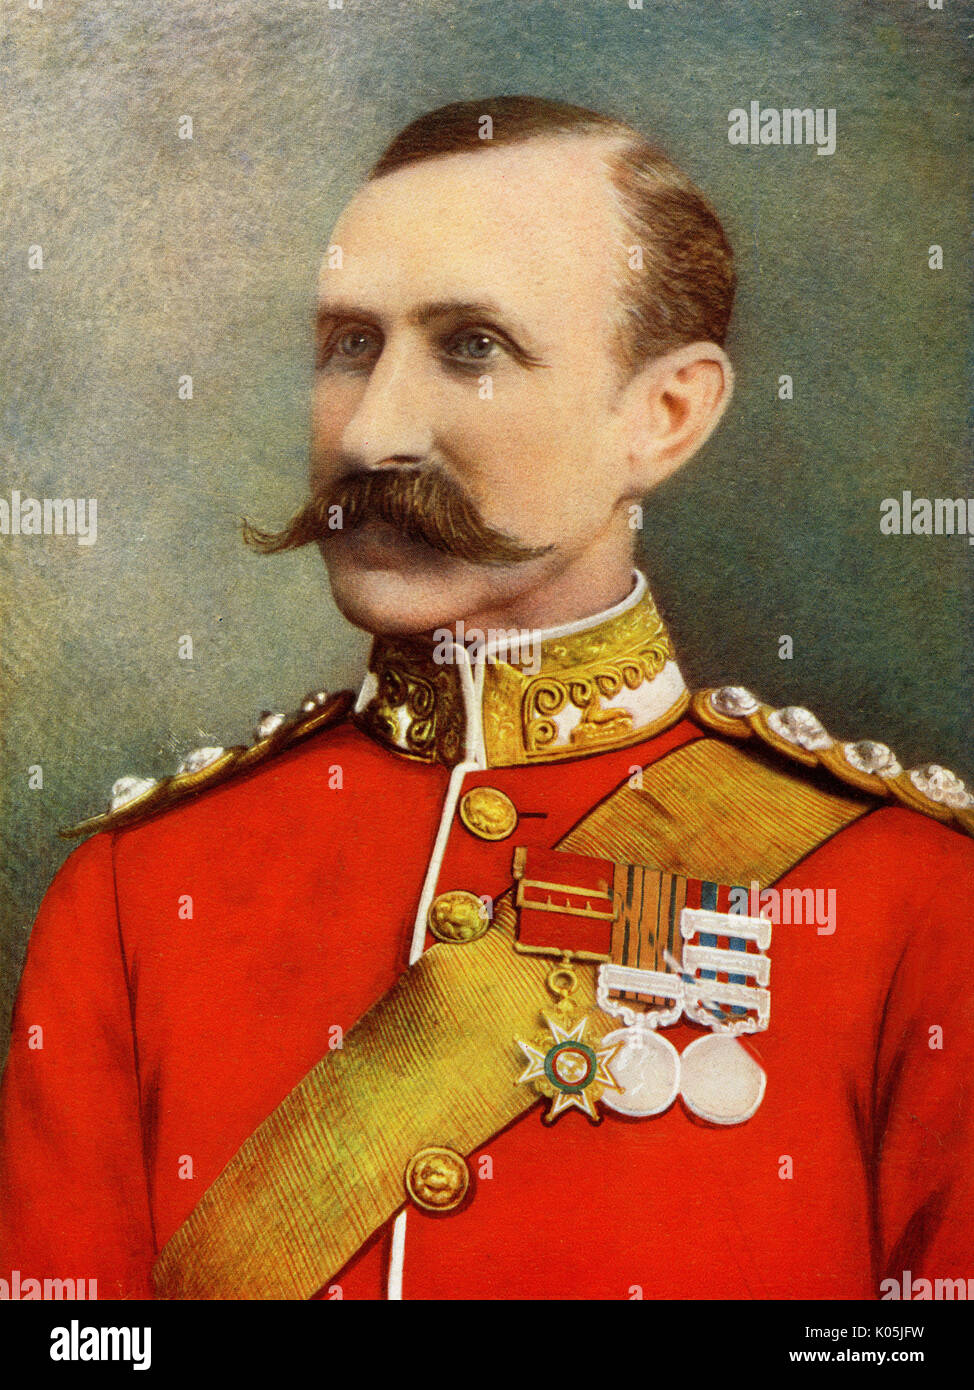 Sir Penn Symong (1843 - 1899) British military commander (participant in the Boer War)       Date: Stock Photo